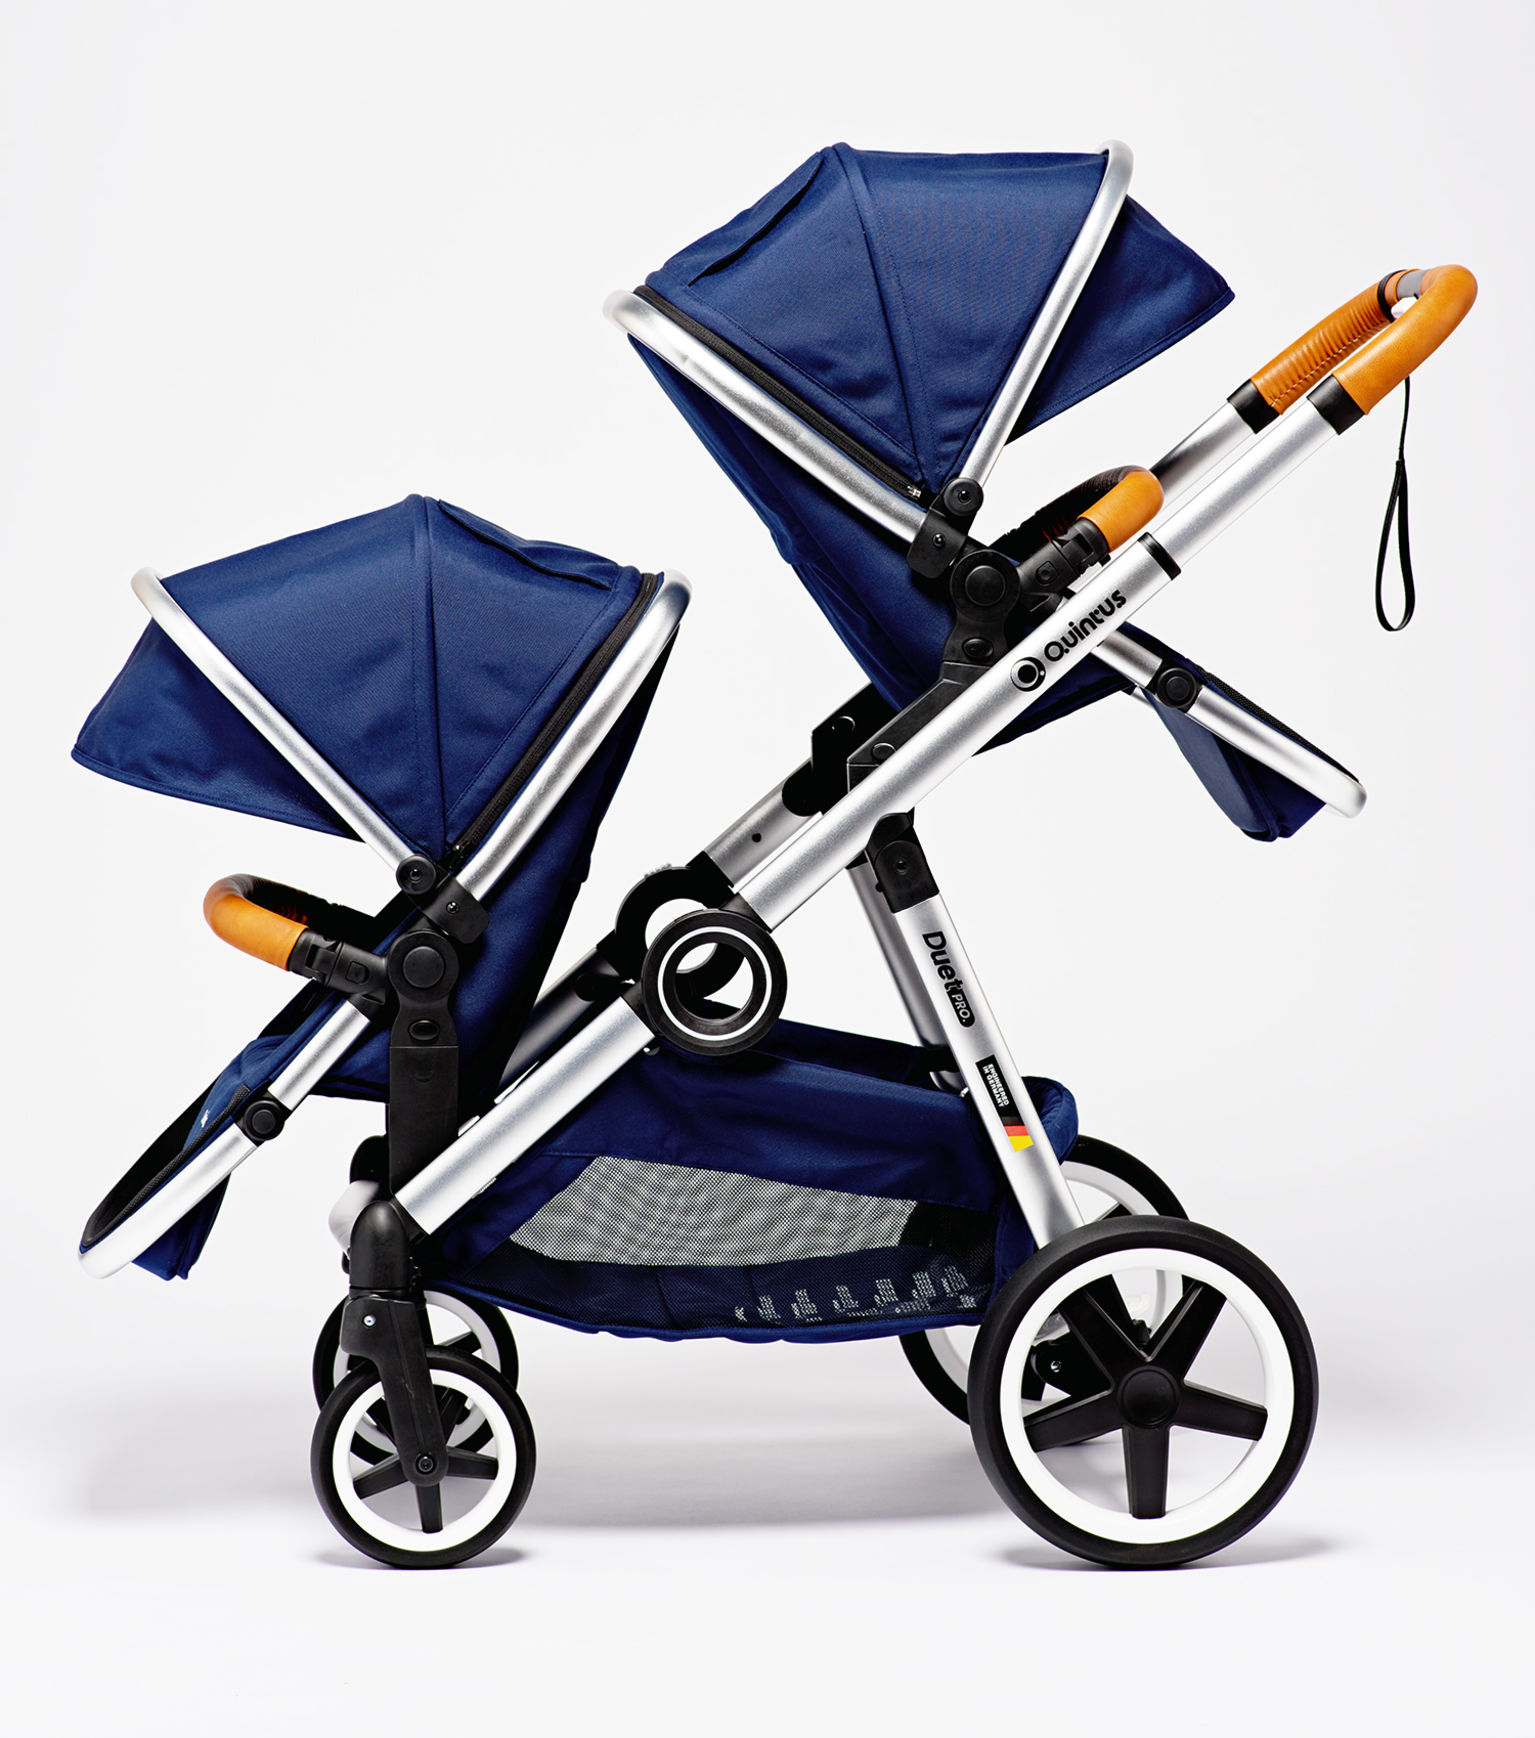 side by side double pram for newborn and toddler